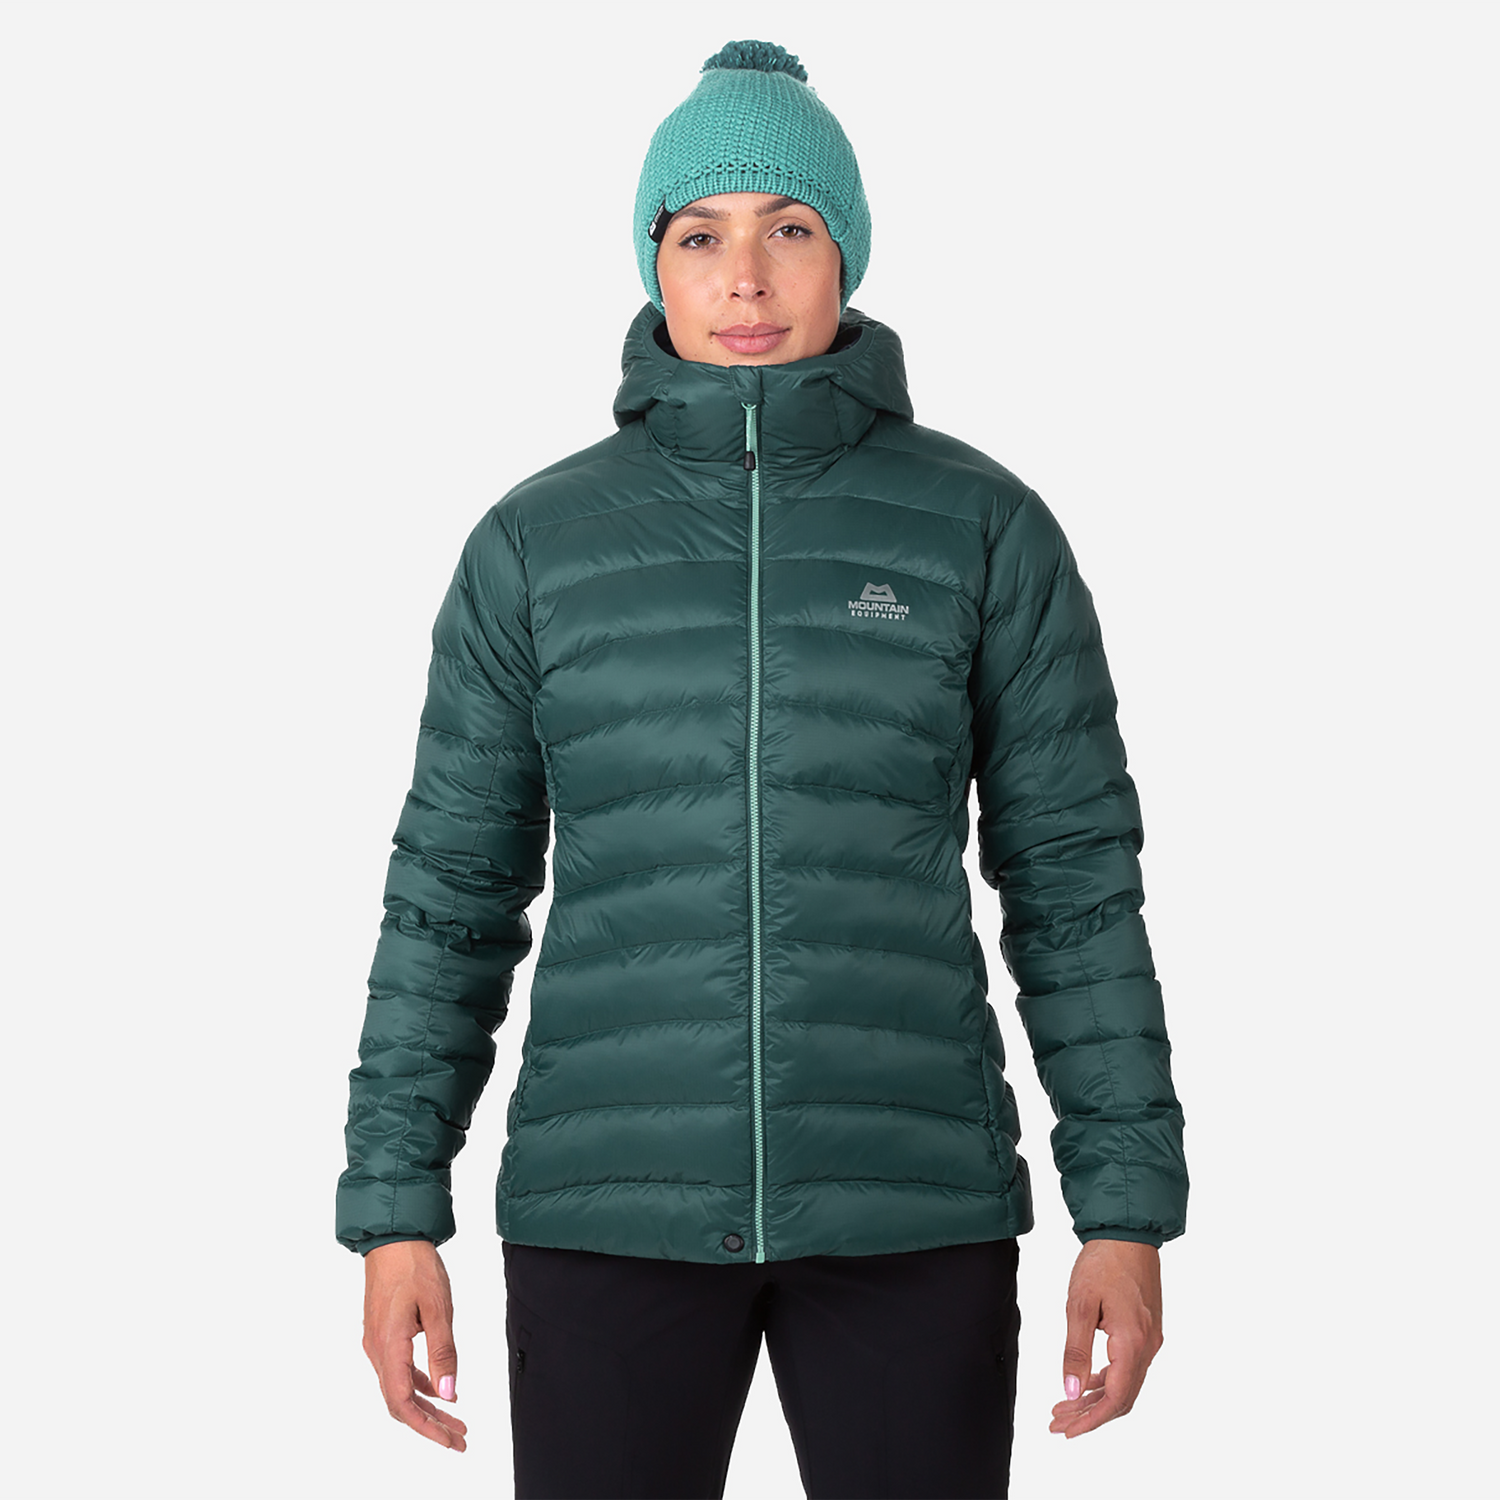 Unlock Wilderness' choice in the Mountain Equipment Vs North Face comparison, the Frostline Jacket by Mountain Equipment